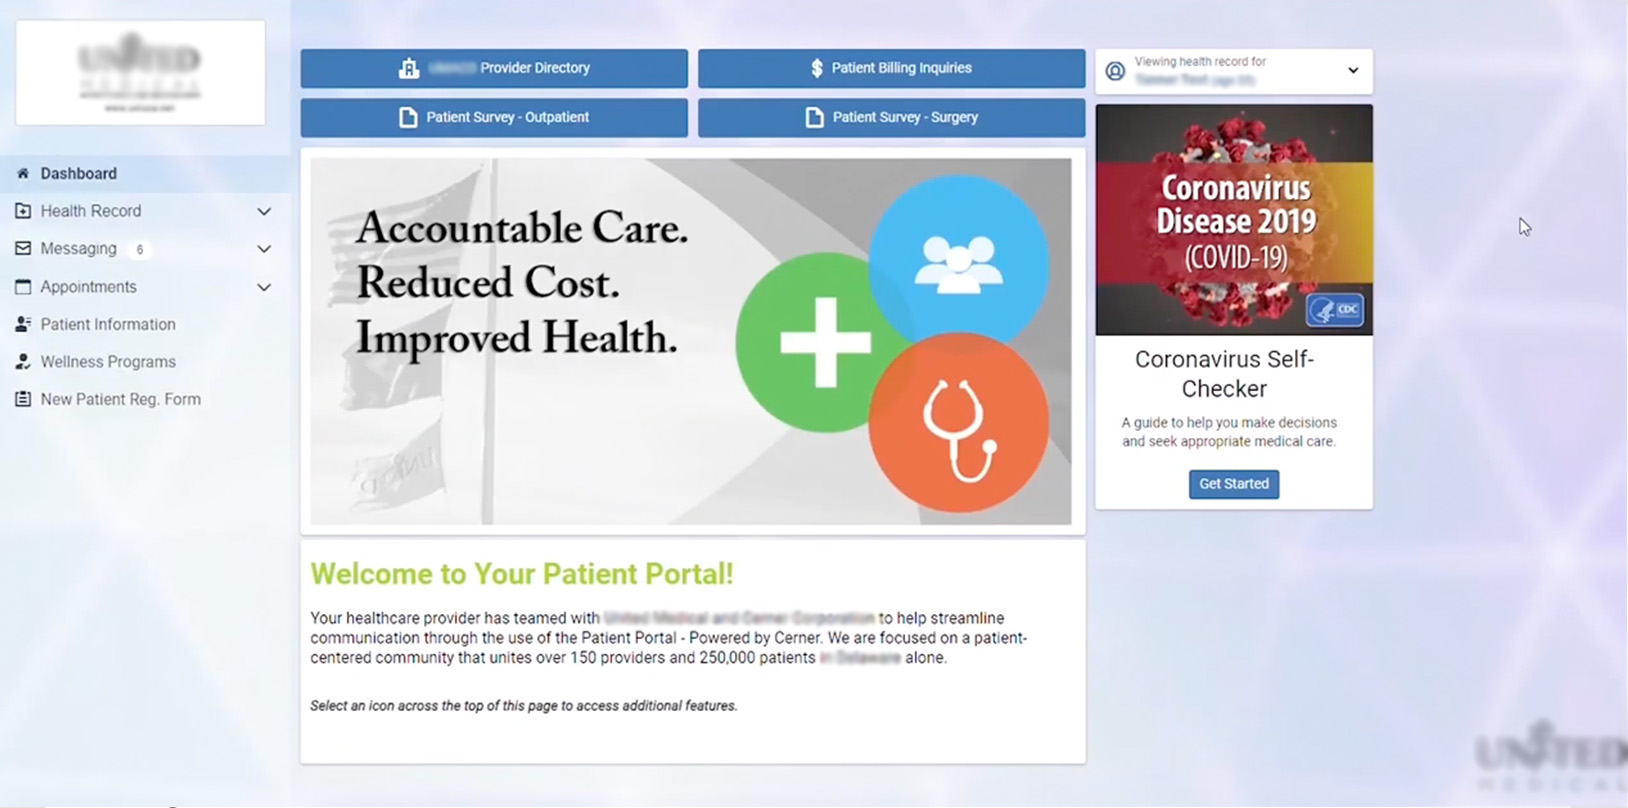 View of a patient portal’s dashboard showing quick links, a large graphic with a slogan, a welcome message, and a coronavirus self-checker.